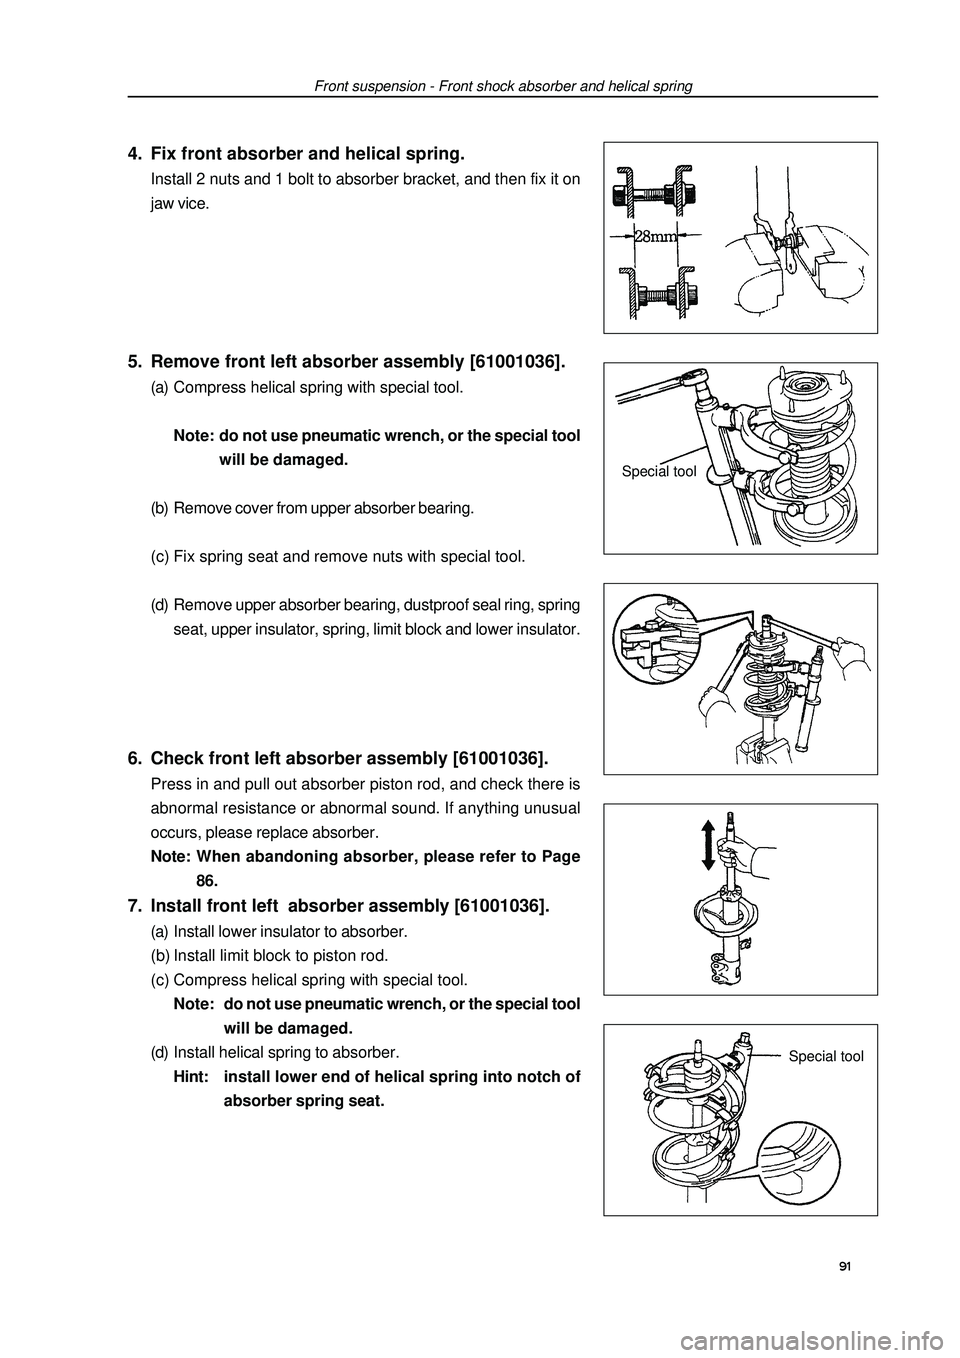 GEELY FC 2008  Workshop Manual Front suspension - Front shock absorber and helical springSpecial tool
Special tool91 4. Fix front absorber and helical spring.Install 2 nuts and 1 bolt to absorber bracket, and then fix it on
jaw vic